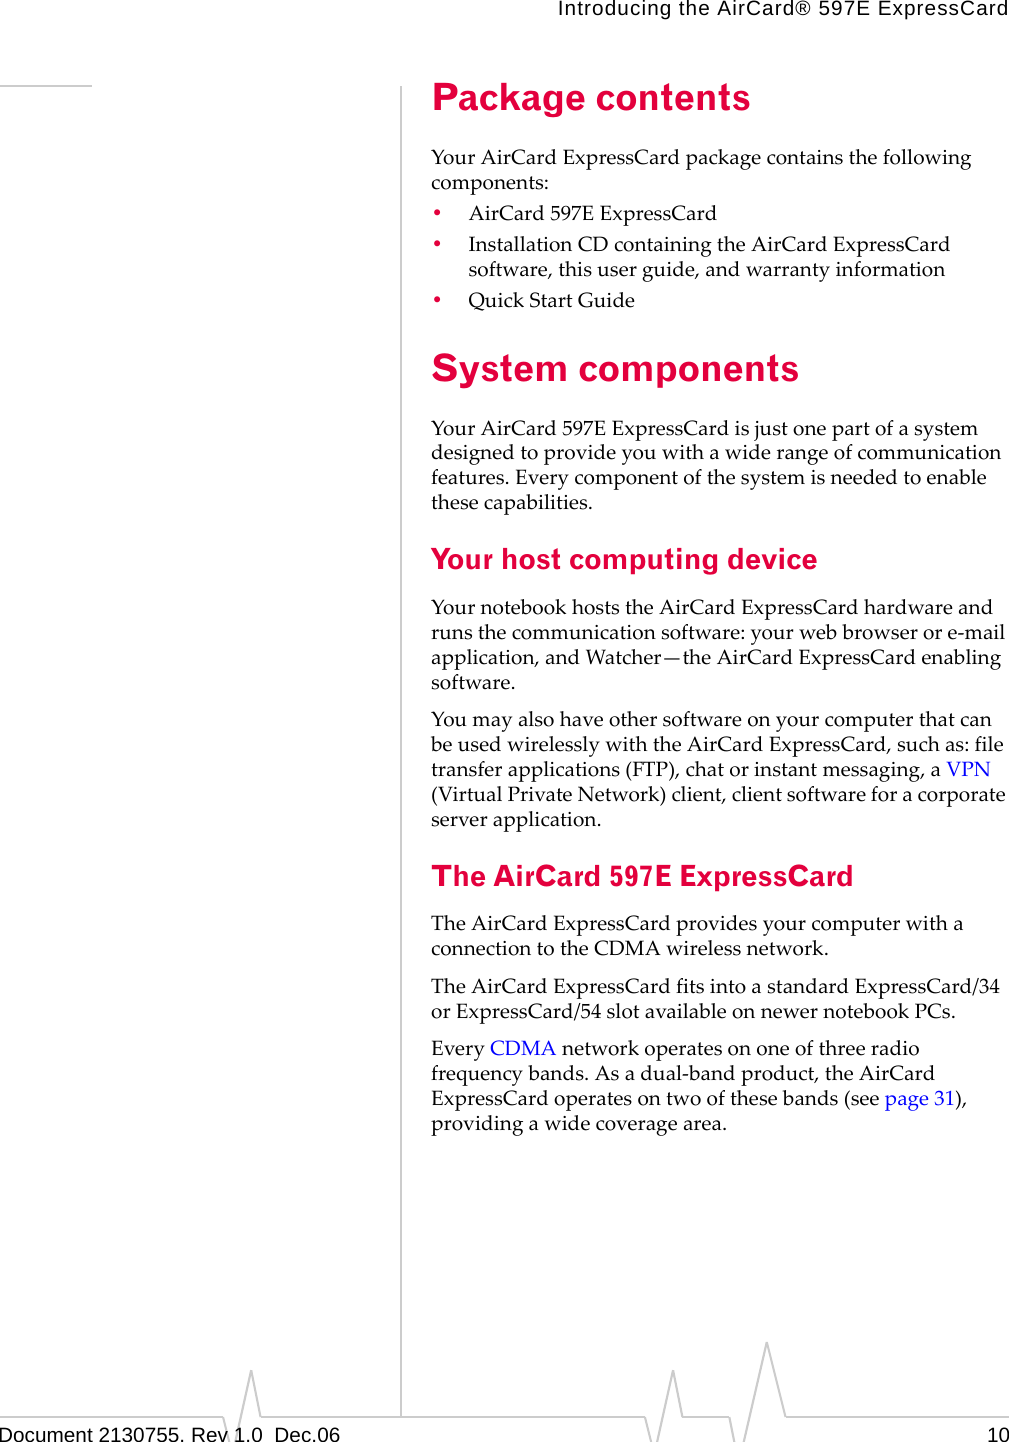 Introducing the AirCard® 597E ExpressCardDocument 2130755. Rev 1.0  Dec.06 10Package contentsYourAirCardExpressCardpackagecontainsthefollowingcomponents:•AirCard 597EExpressCard•InstallationCDcontainingtheAirCardExpressCardsoftware,thisuserguide,andwarrantyinformation•QuickStartGuideSystem componentsYourAirCard 597EExpressCardisjustonepartofasystemdesignedtoprovideyouwithawiderangeofcommunicationfeatures.Everycomponentofthesystemisneededtoenablethesecapabilities.Your host computing deviceYournotebookhoststheAirCardExpressCardhardwareandrunsthecommunicationsoftware:yourwebbrowserore‐mailapplication,andWatcher—theAirCardExpressCardenablingsoftware.YoumayalsohaveothersoftwareonyourcomputerthatcanbeusedwirelesslywiththeAirCardExpressCard,suchas:filetransferapplications(FTP),chatorinstantmessaging,aVPN(VirtualPrivateNetwork)client,clientsoftwareforacorporateserverapplication.The AirCard 597E ExpressCardTheAirCardExpressCardprovidesyourcomputerwithaconnectiontotheCDMAwirelessnetwork.TheAirCardExpressCardfitsintoastandardExpressCard/34orExpressCard/54slotavailableonnewernotebookPCs.EveryCDMAnetworkoperatesononeofthreeradiofrequencybands.Asadual‐bandproduct,theAirCardExpressCardoperatesontwoofthesebands(seepage 31),providingawidecoveragearea.